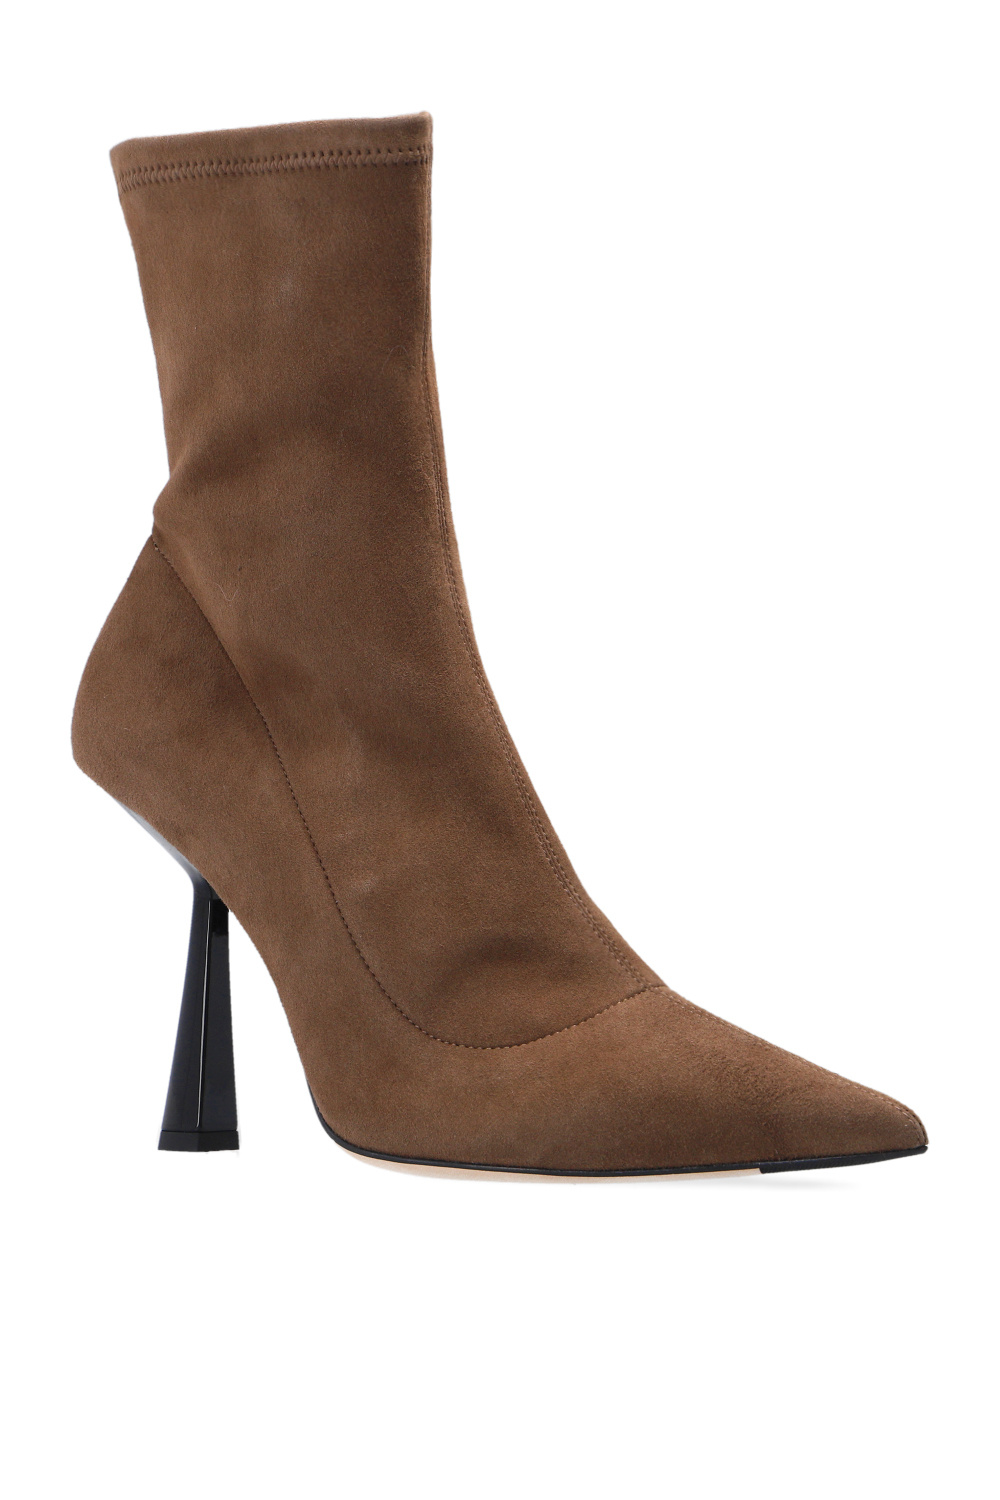 Jimmy Choo ‘Bray’ heeled ankle boots